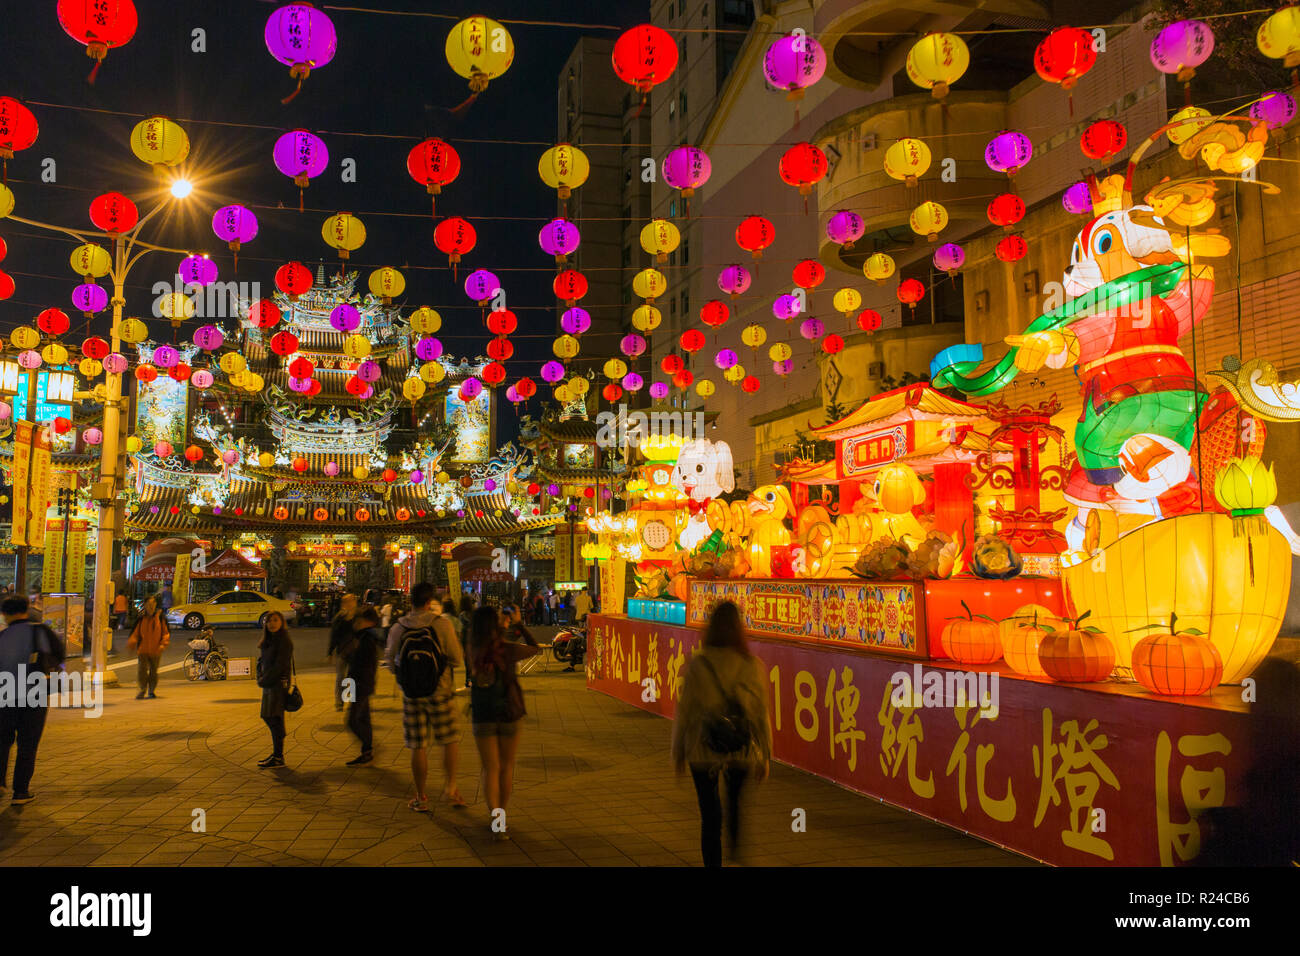 Street decorations outside Ciyou Temple, Songshan District, Taipei, Taiwan, Asia Stock Photo